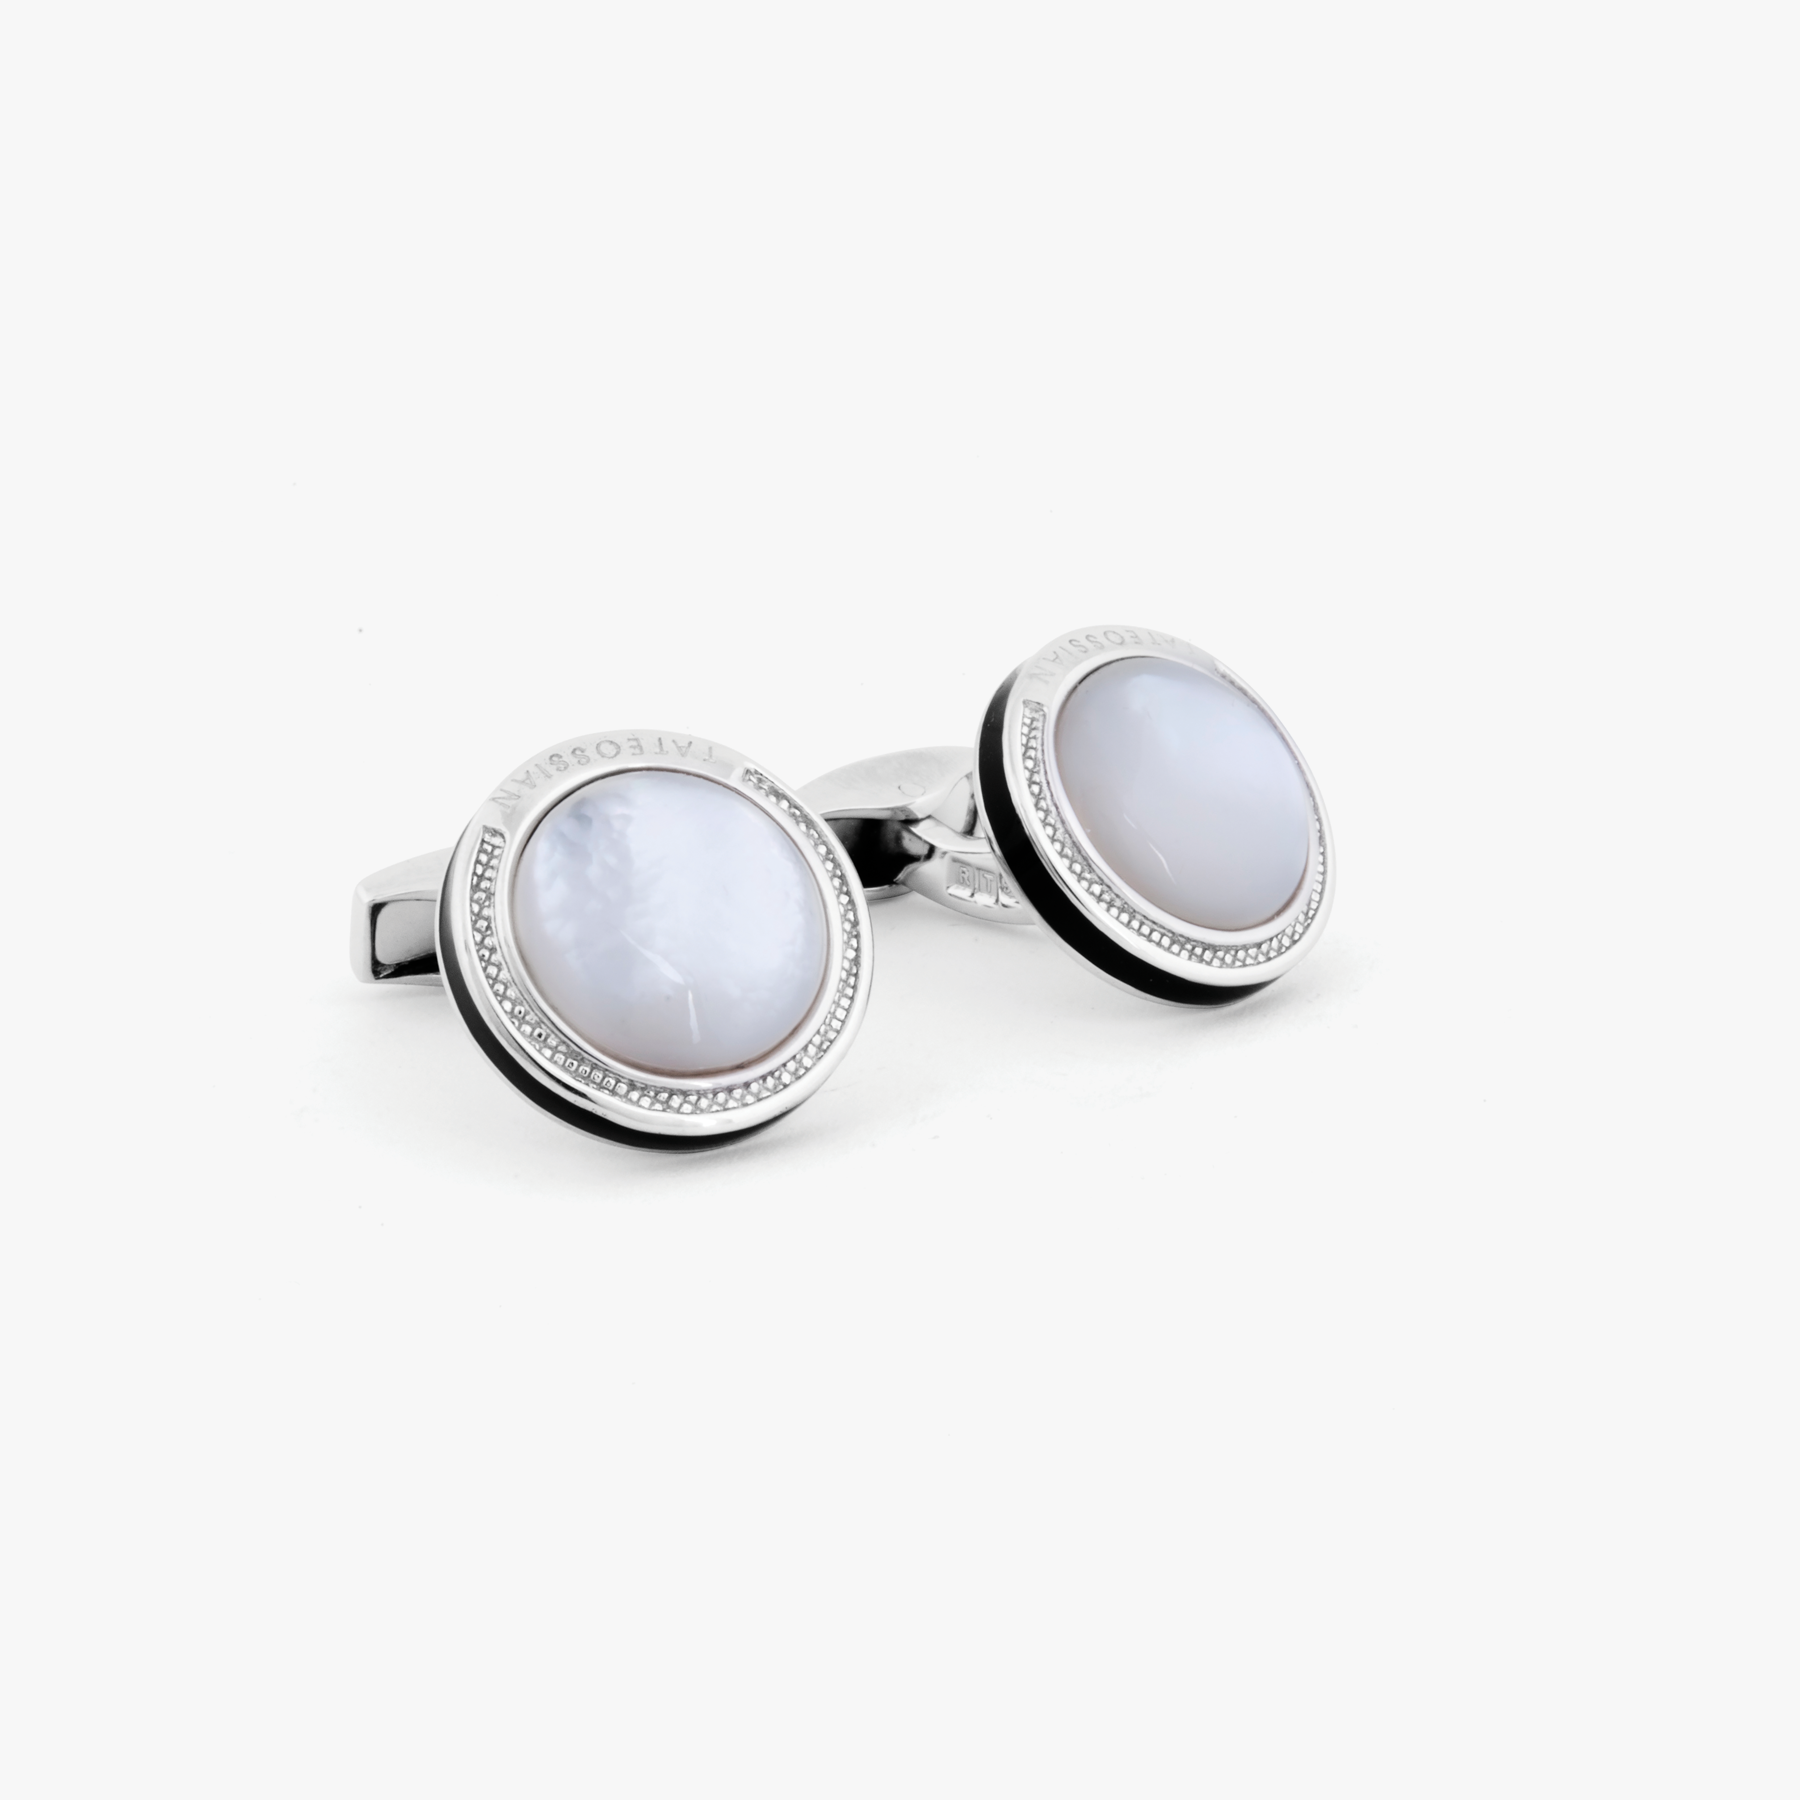 Sterling silver Signature Round cufflinks with white mother of pearl